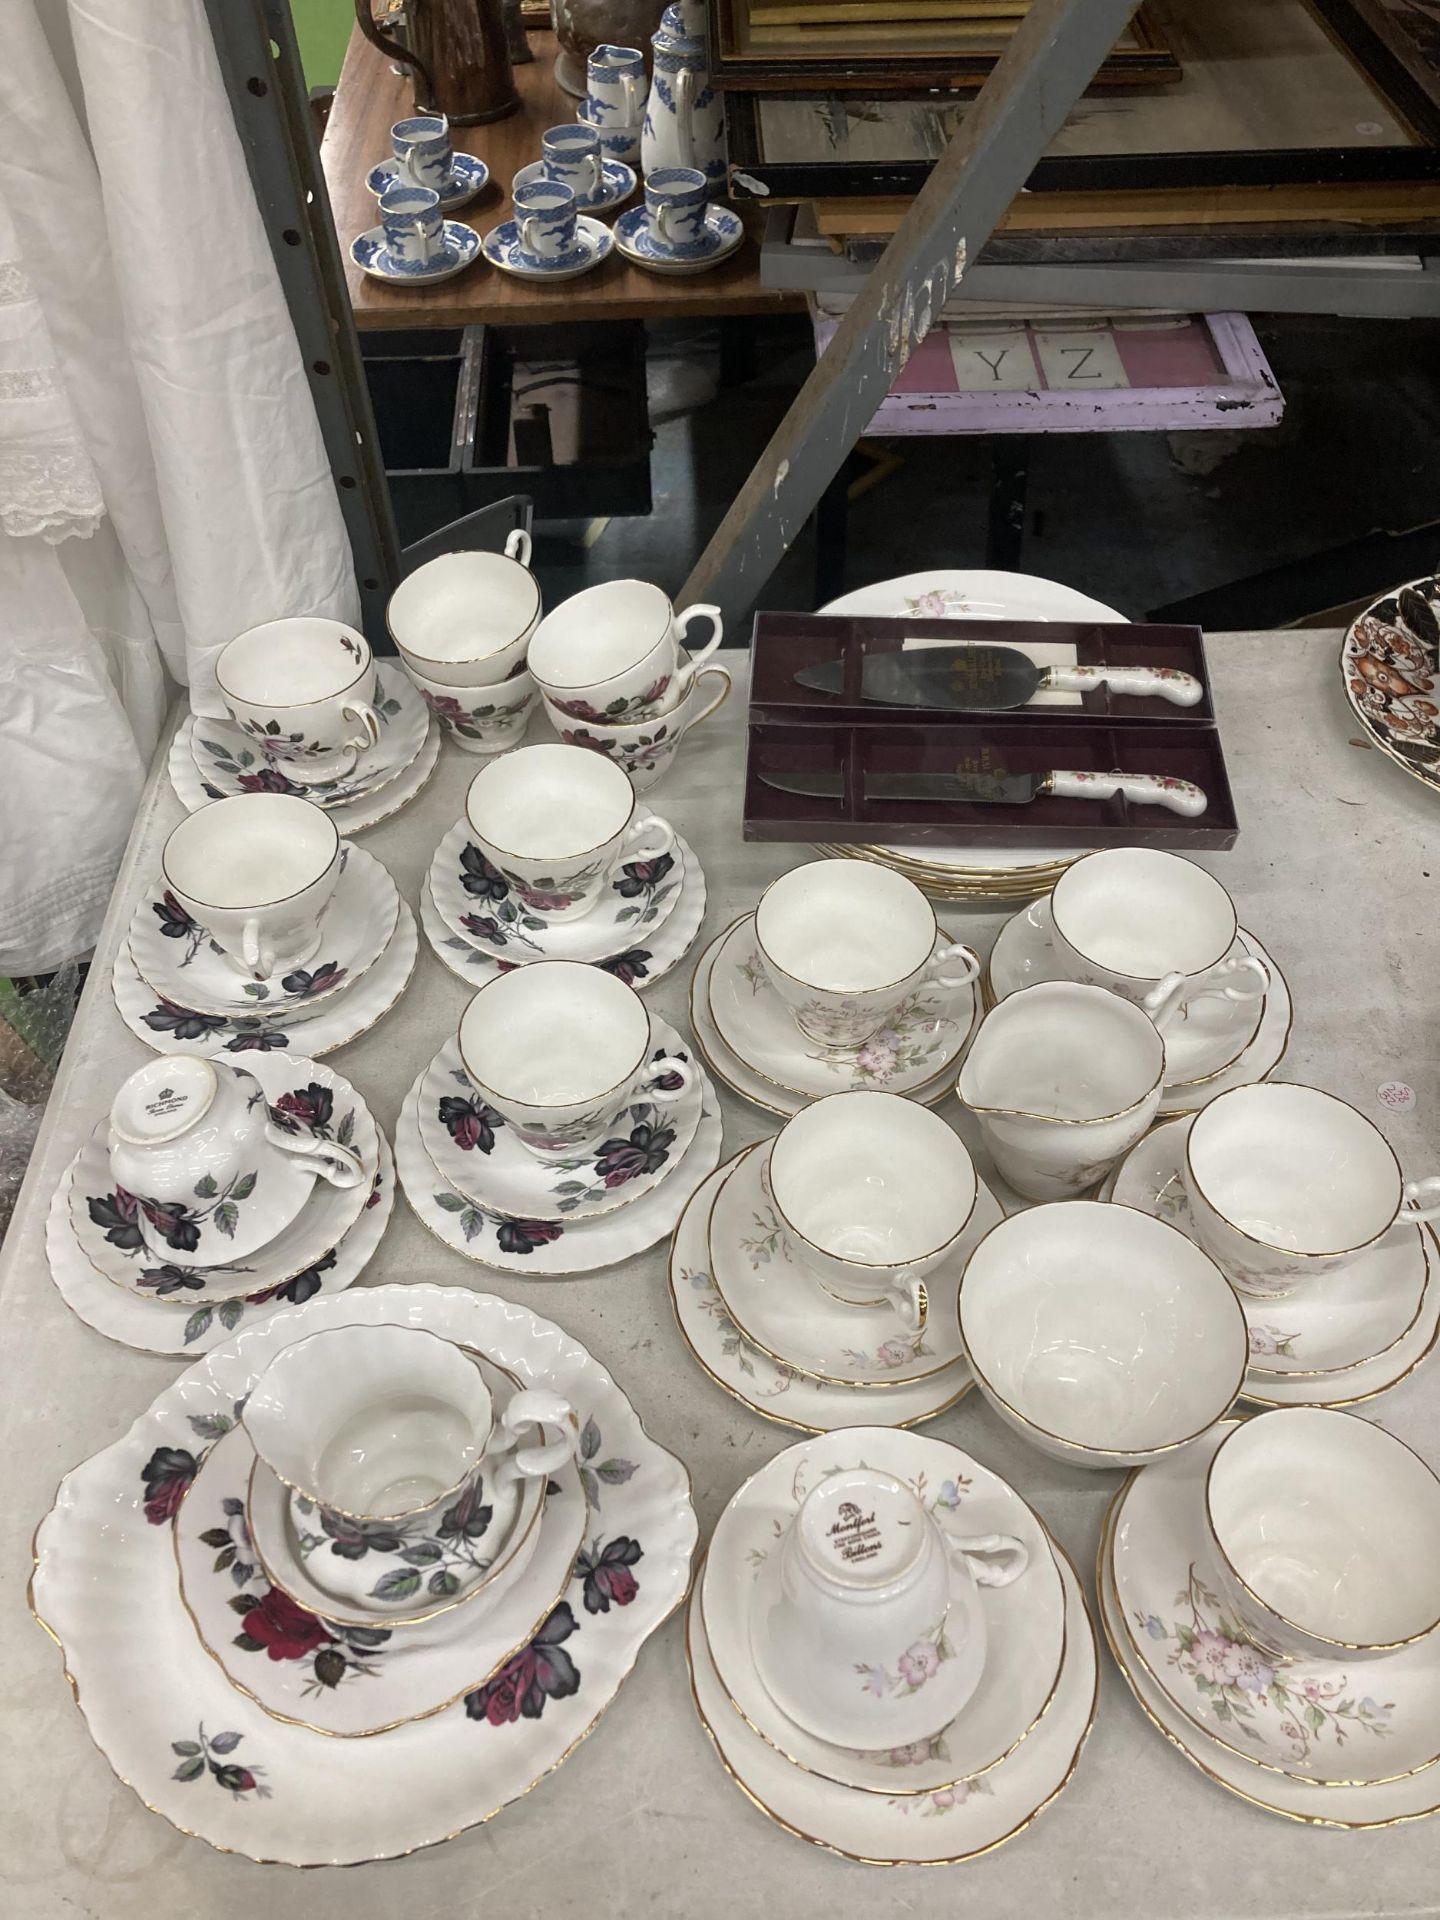 TWO PART CHINA TEASETS, MONTFORT AND RICHMOND, TO INCLUDE A CAKE PLATE, PLATES, CUPS, SAUCERS,